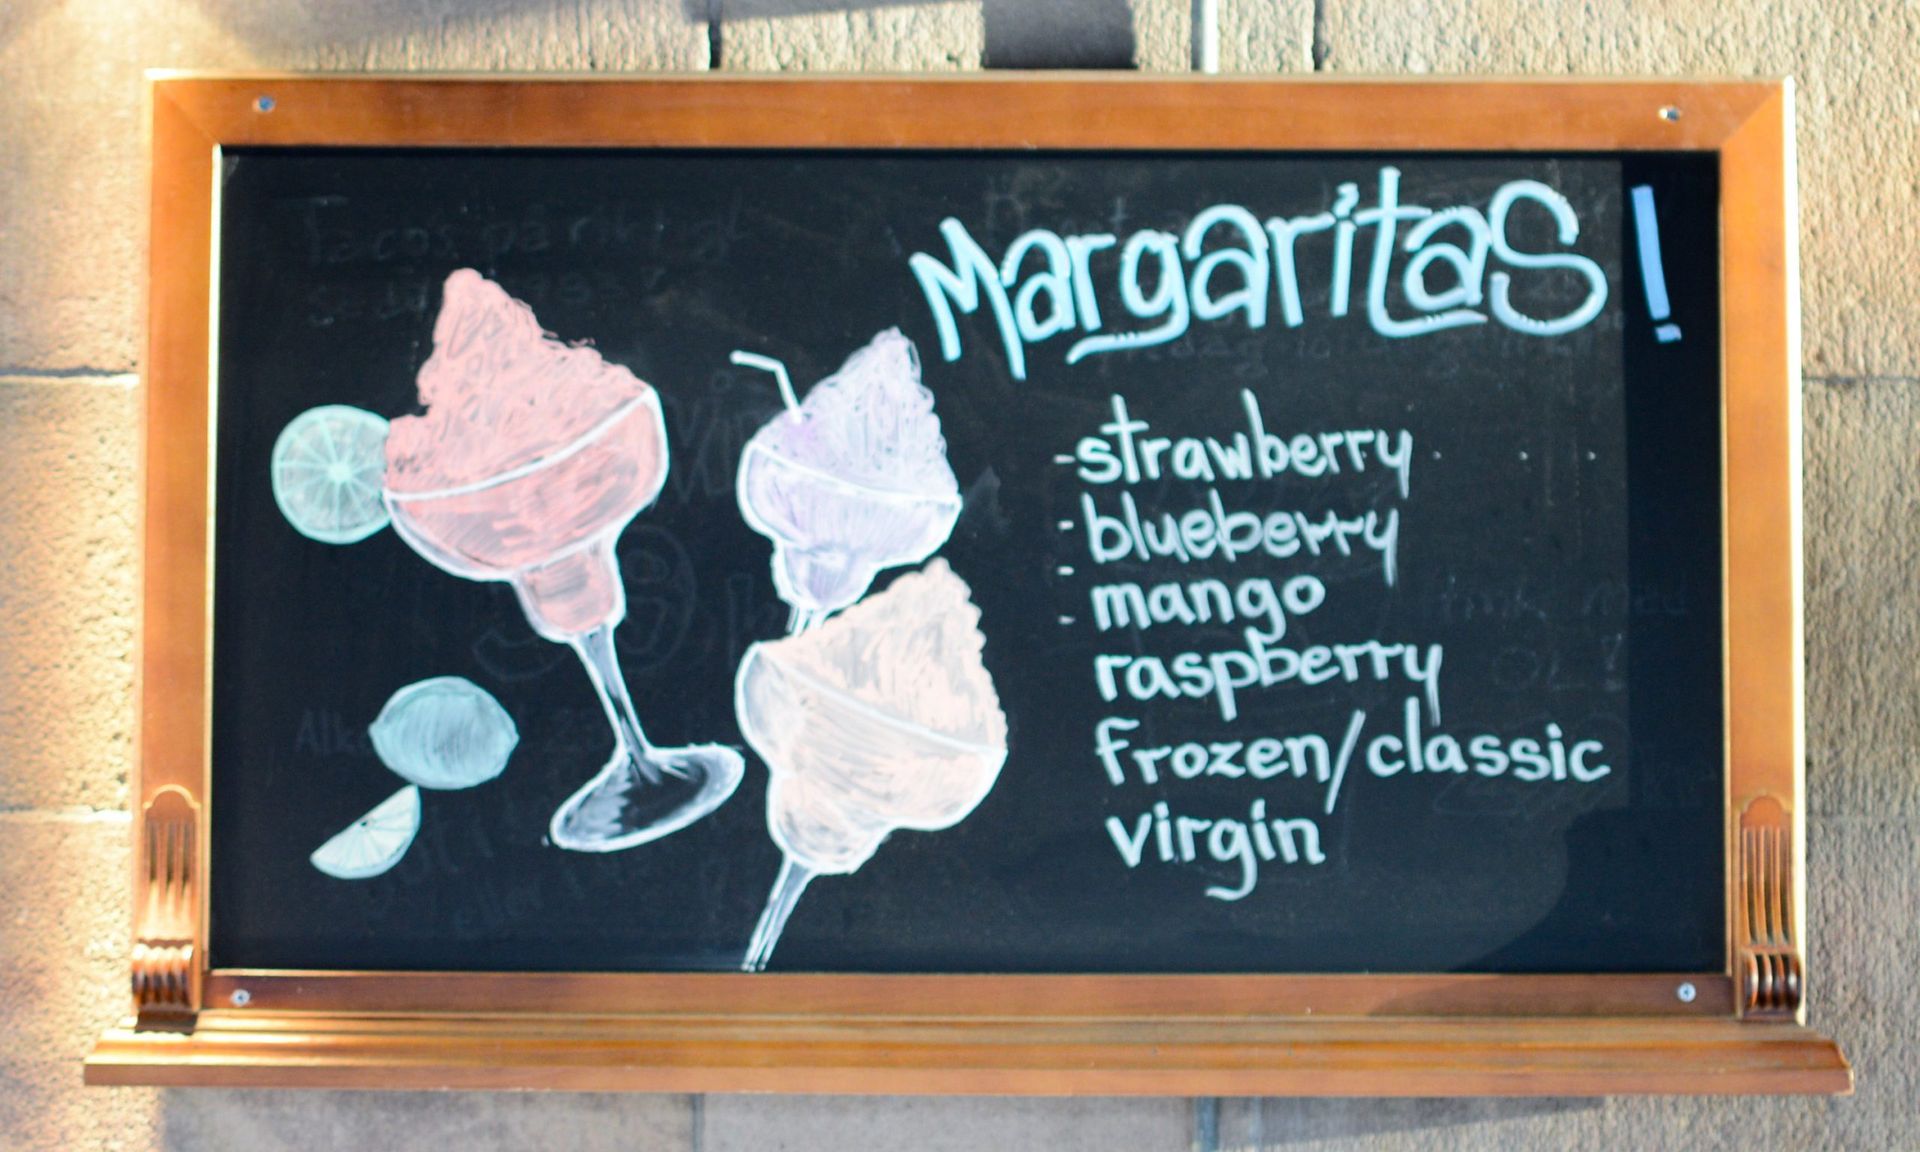 Chalkboard with margarita cocktails drawn on it.